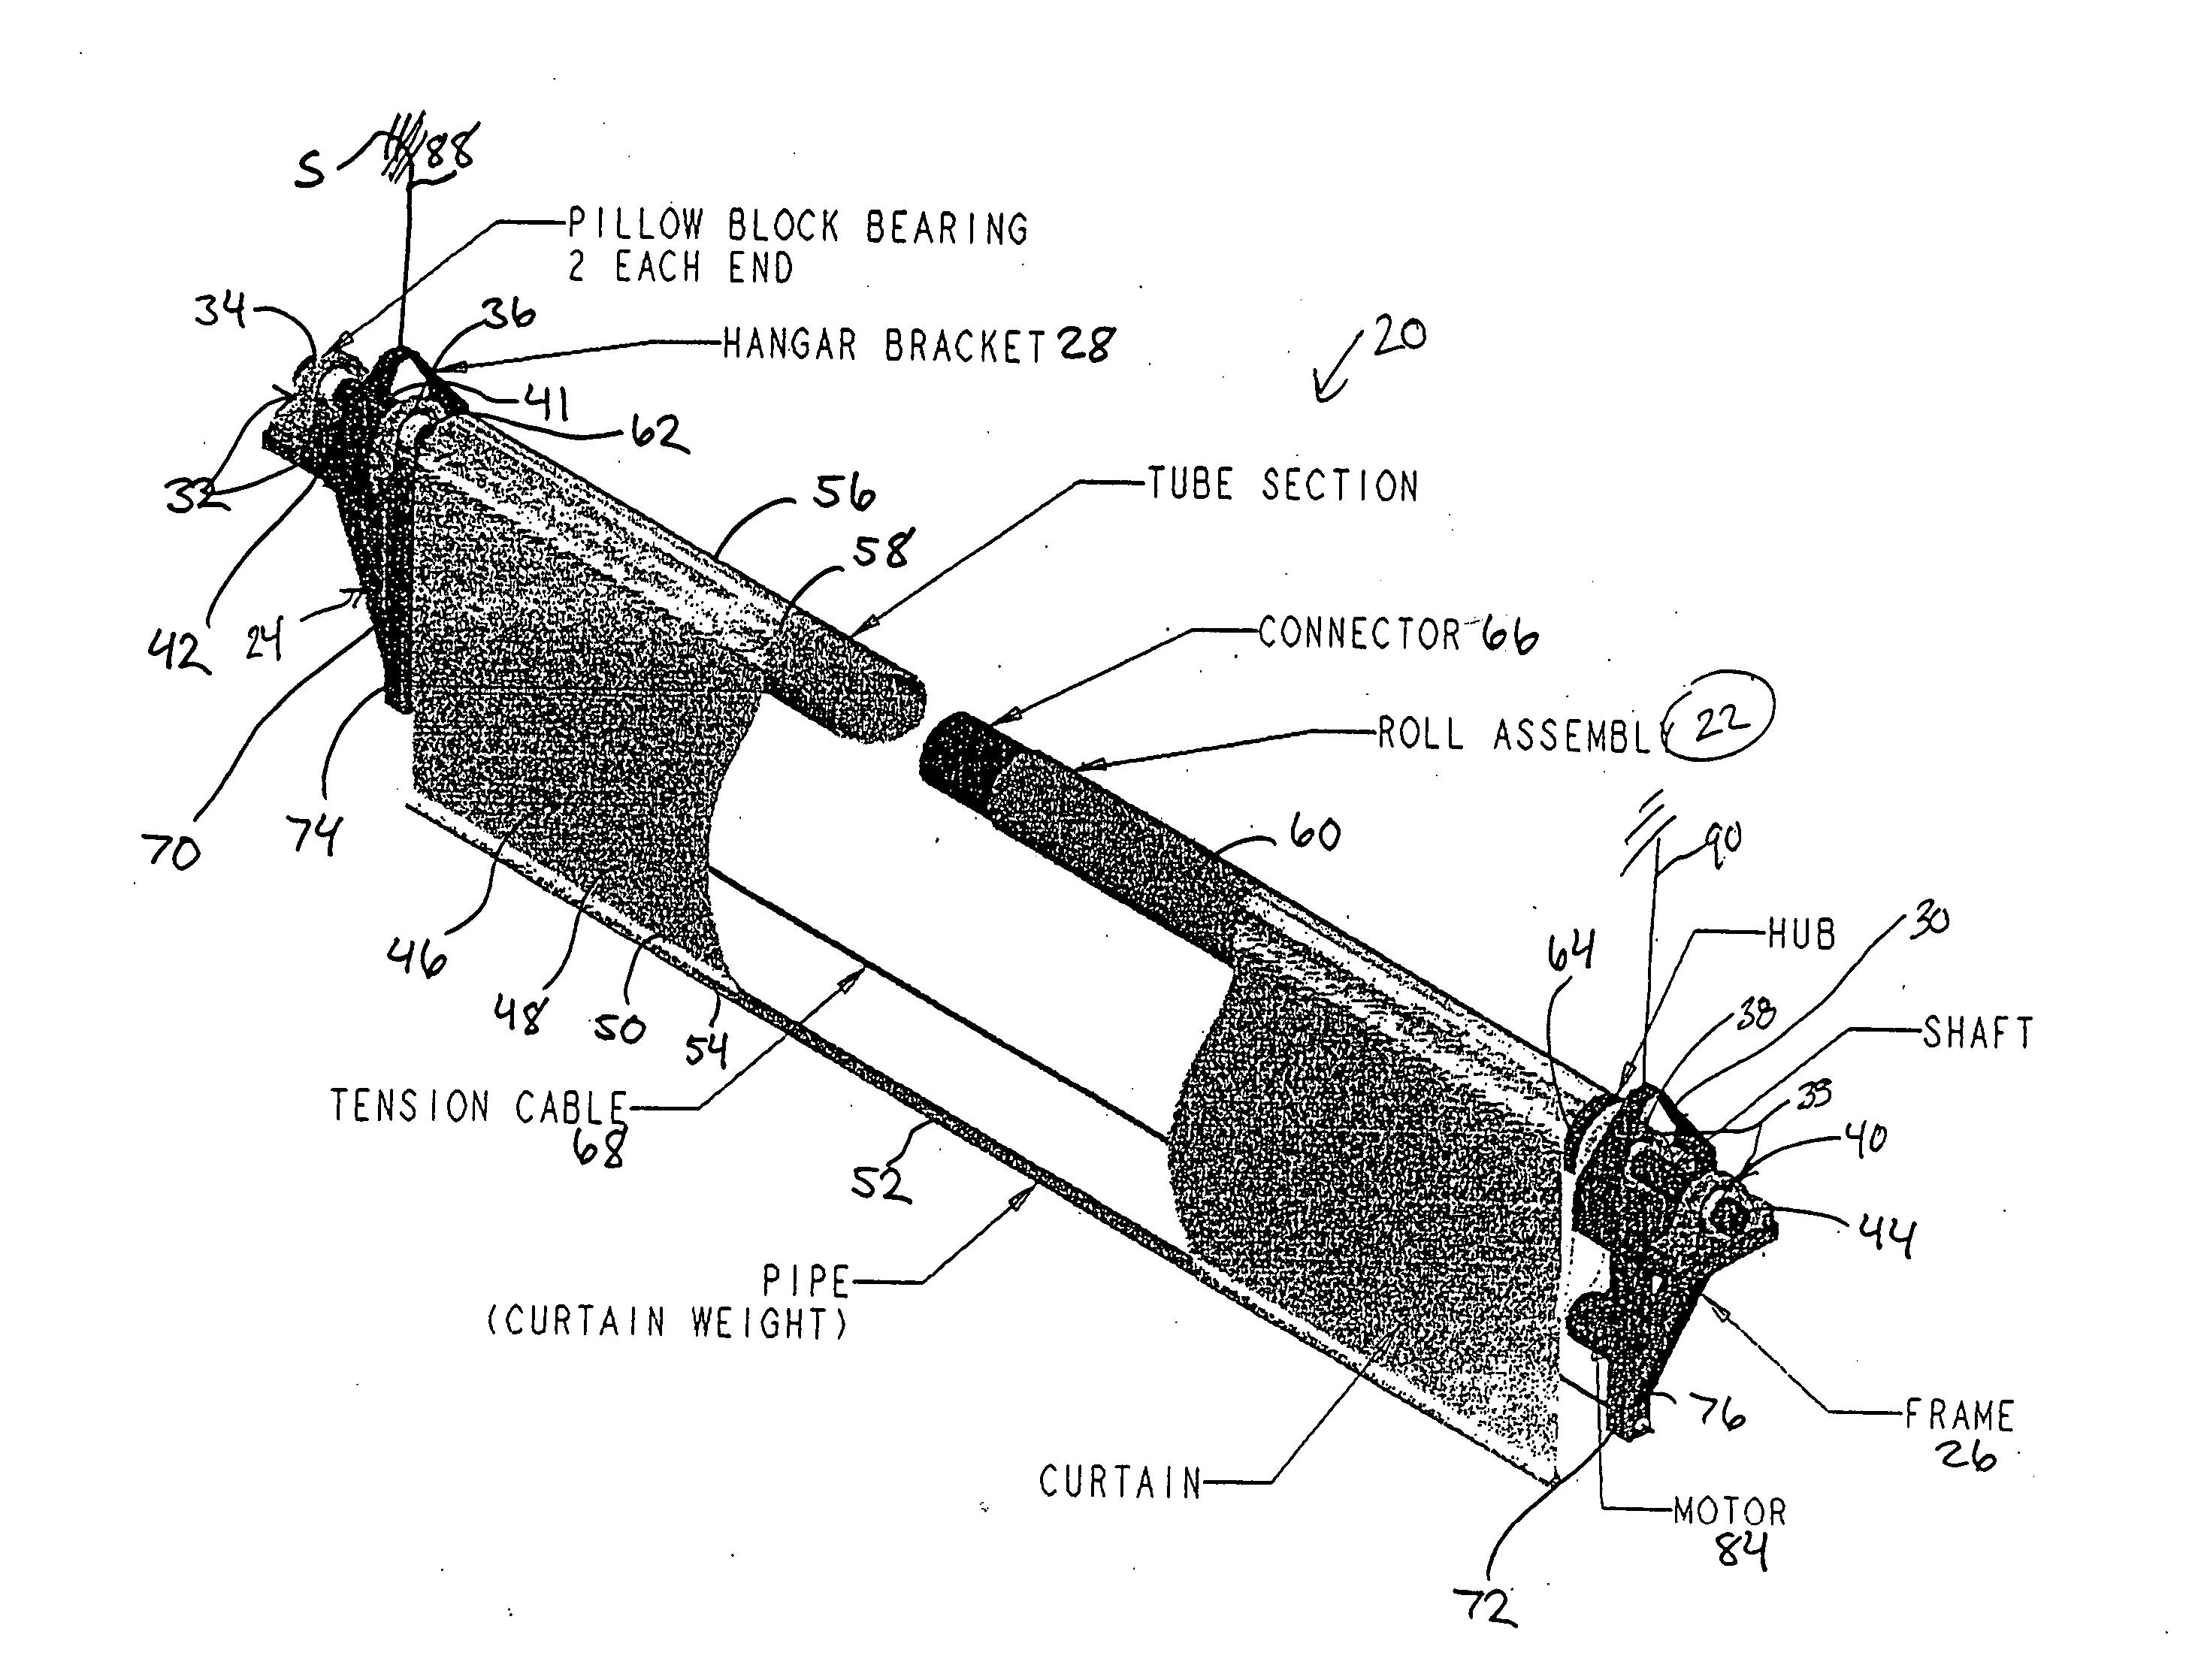 Release device and method of manufacturing, installing and operating the same